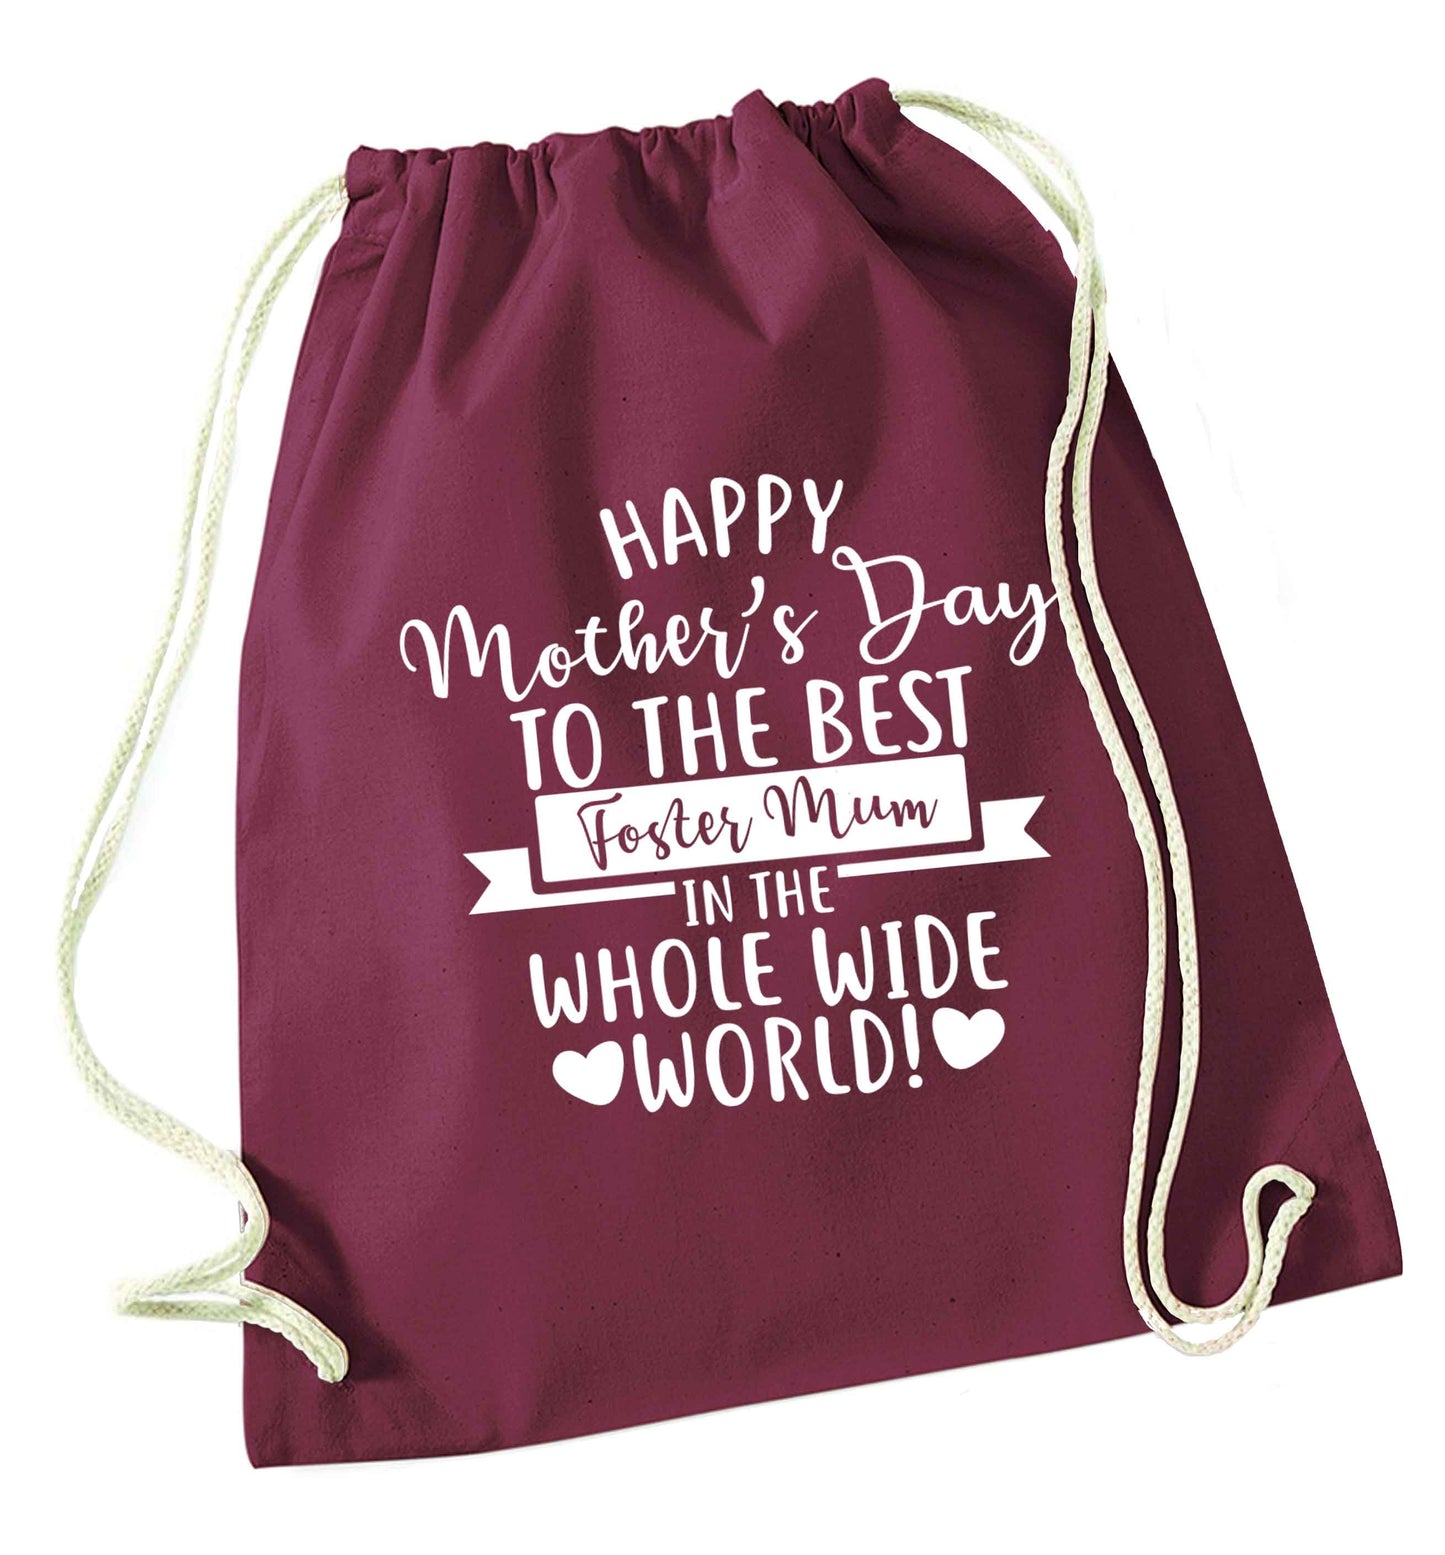 Happy mother's day to the best foster mum in the world maroon drawstring bag